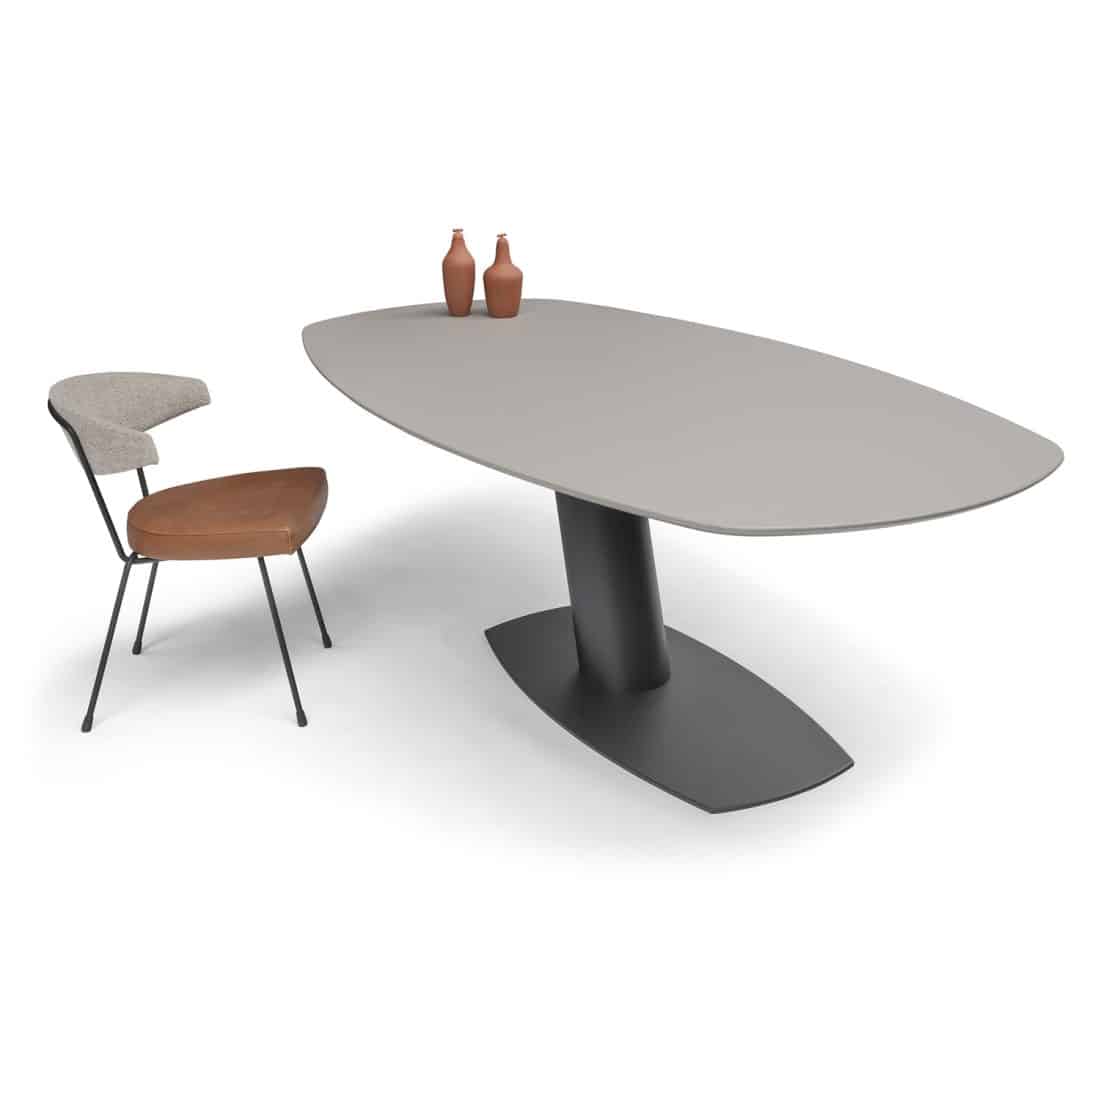 TRP Post Container Data TRP Post ID 10564 Libra 8211 Dining table Danish Oval TRP Post Container